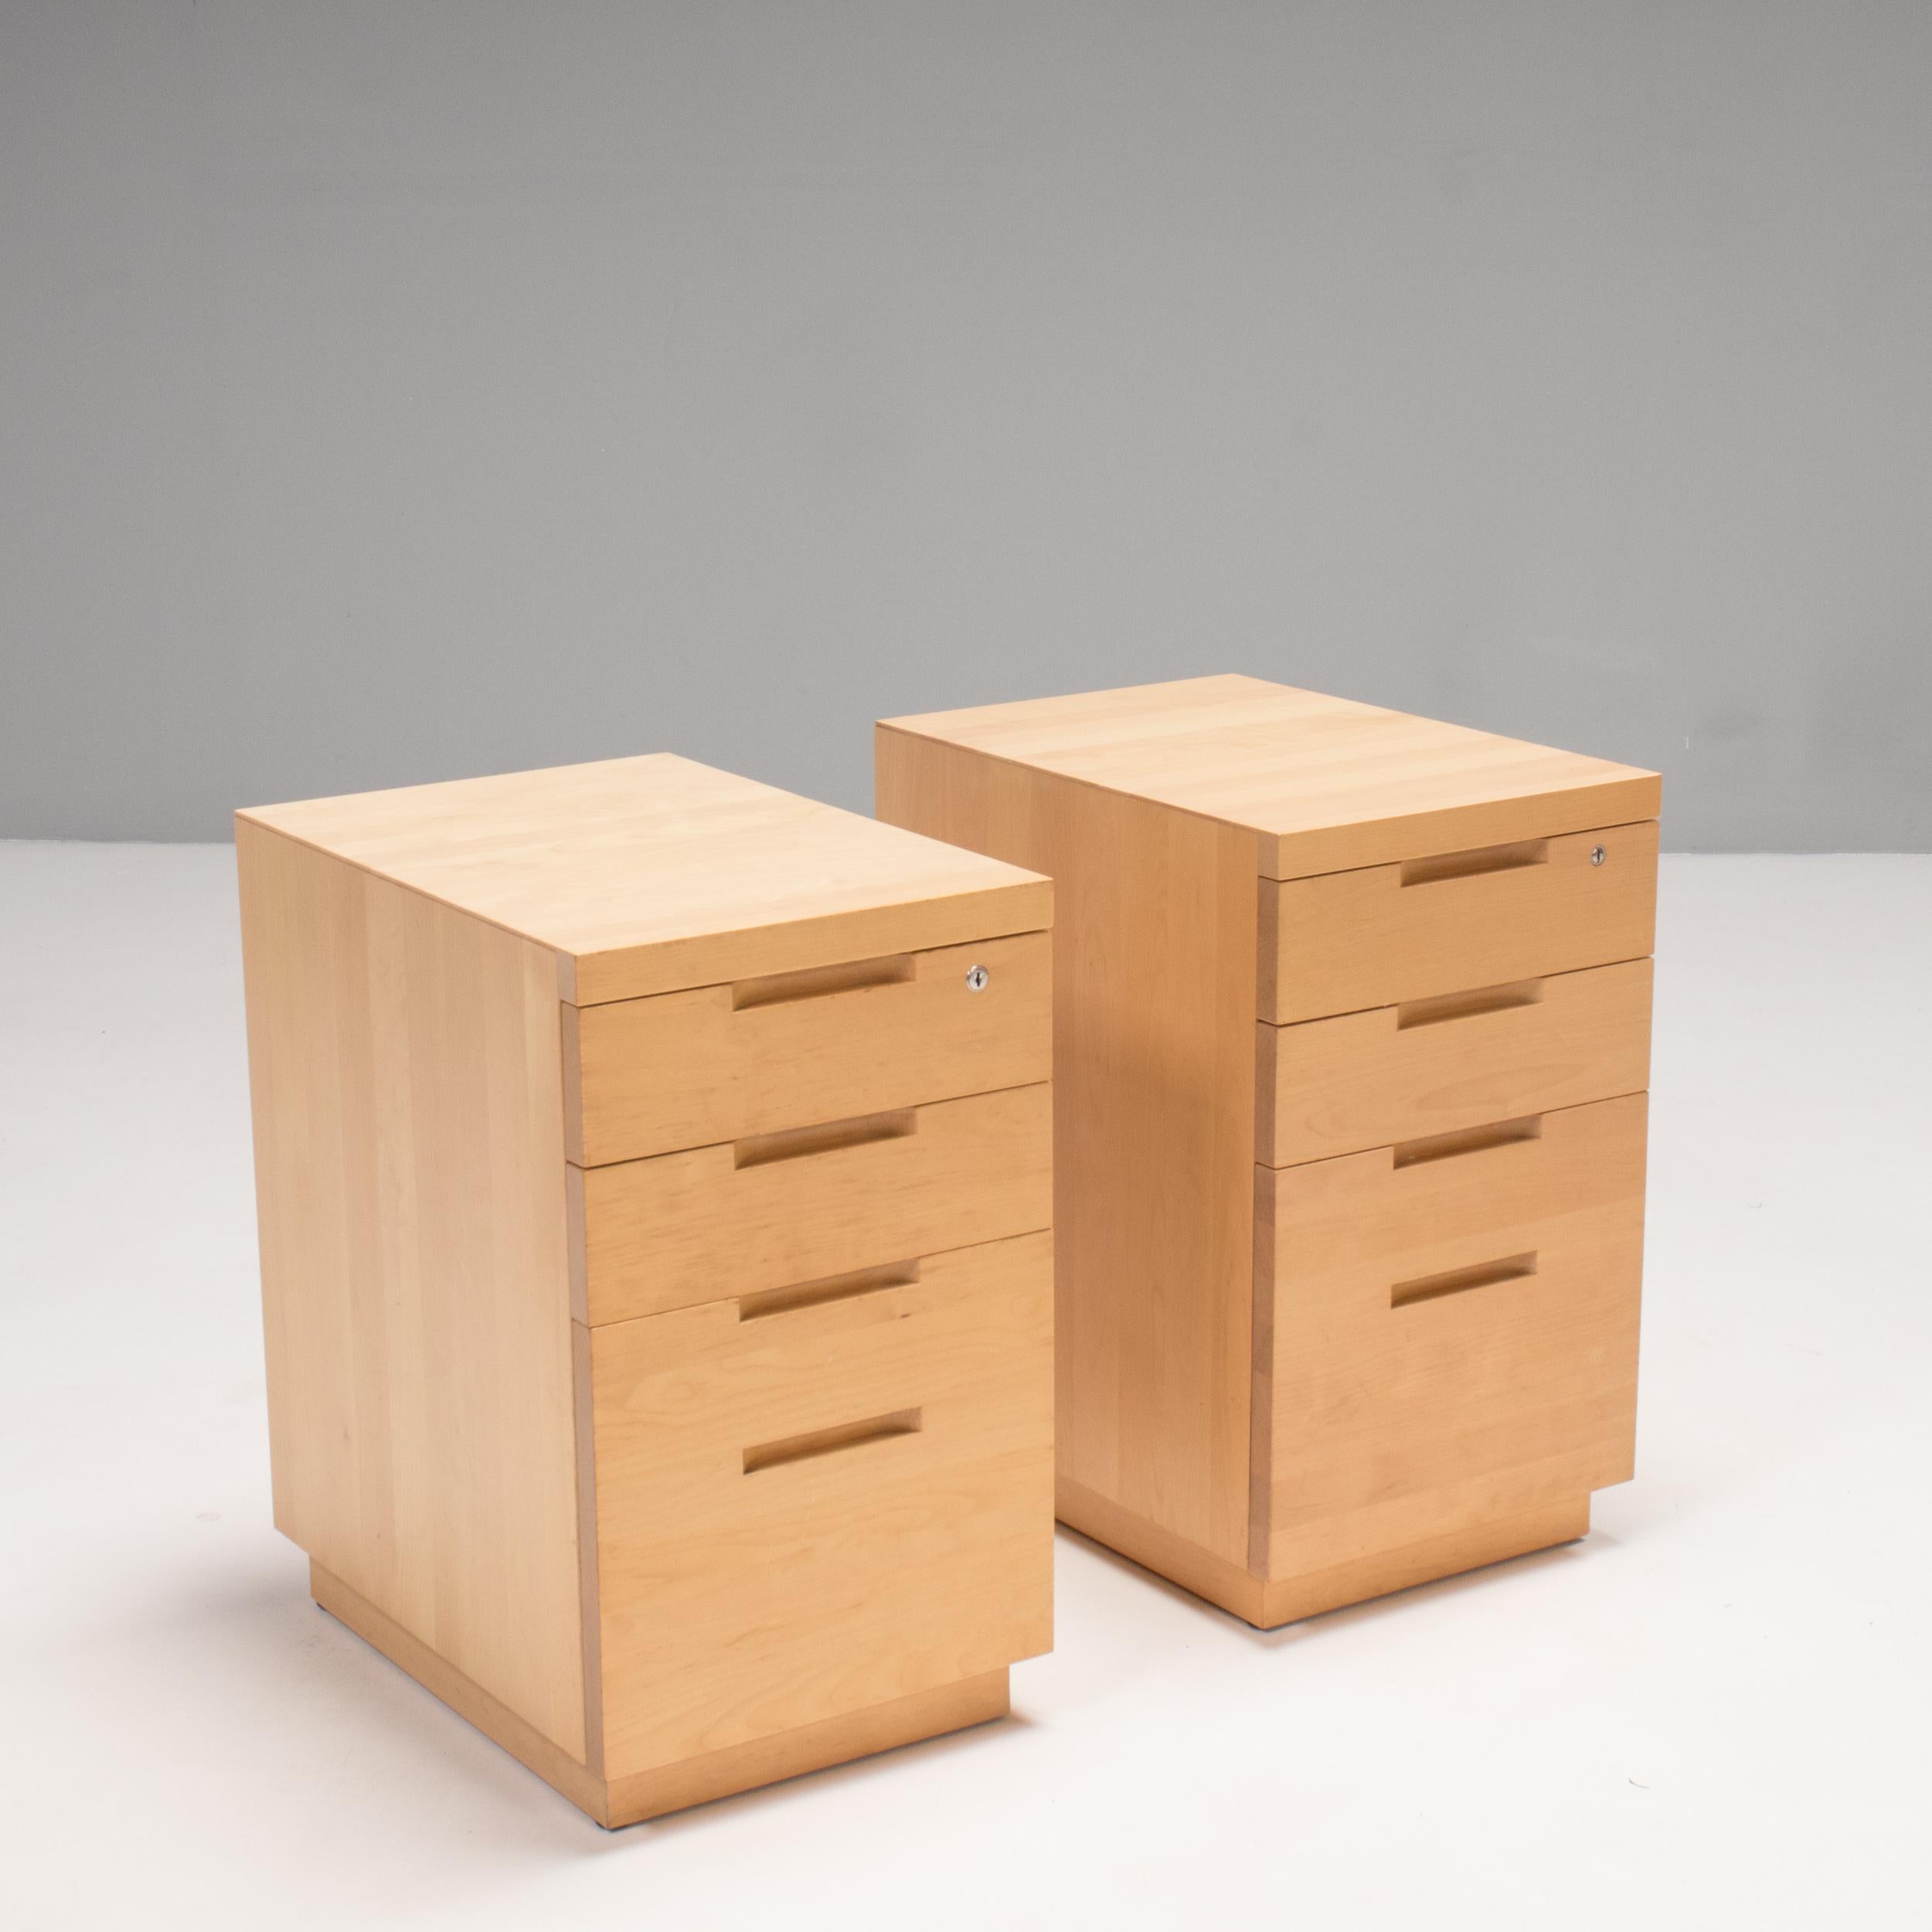 Originally designed by Alvar Aalto in the 1940s, Artek continued to produce the drawer cabinet for decades afterwards.

Constructed from birch wood, the cabinets feature four drawers with integrated pulls. The top drawer has a lock, while the